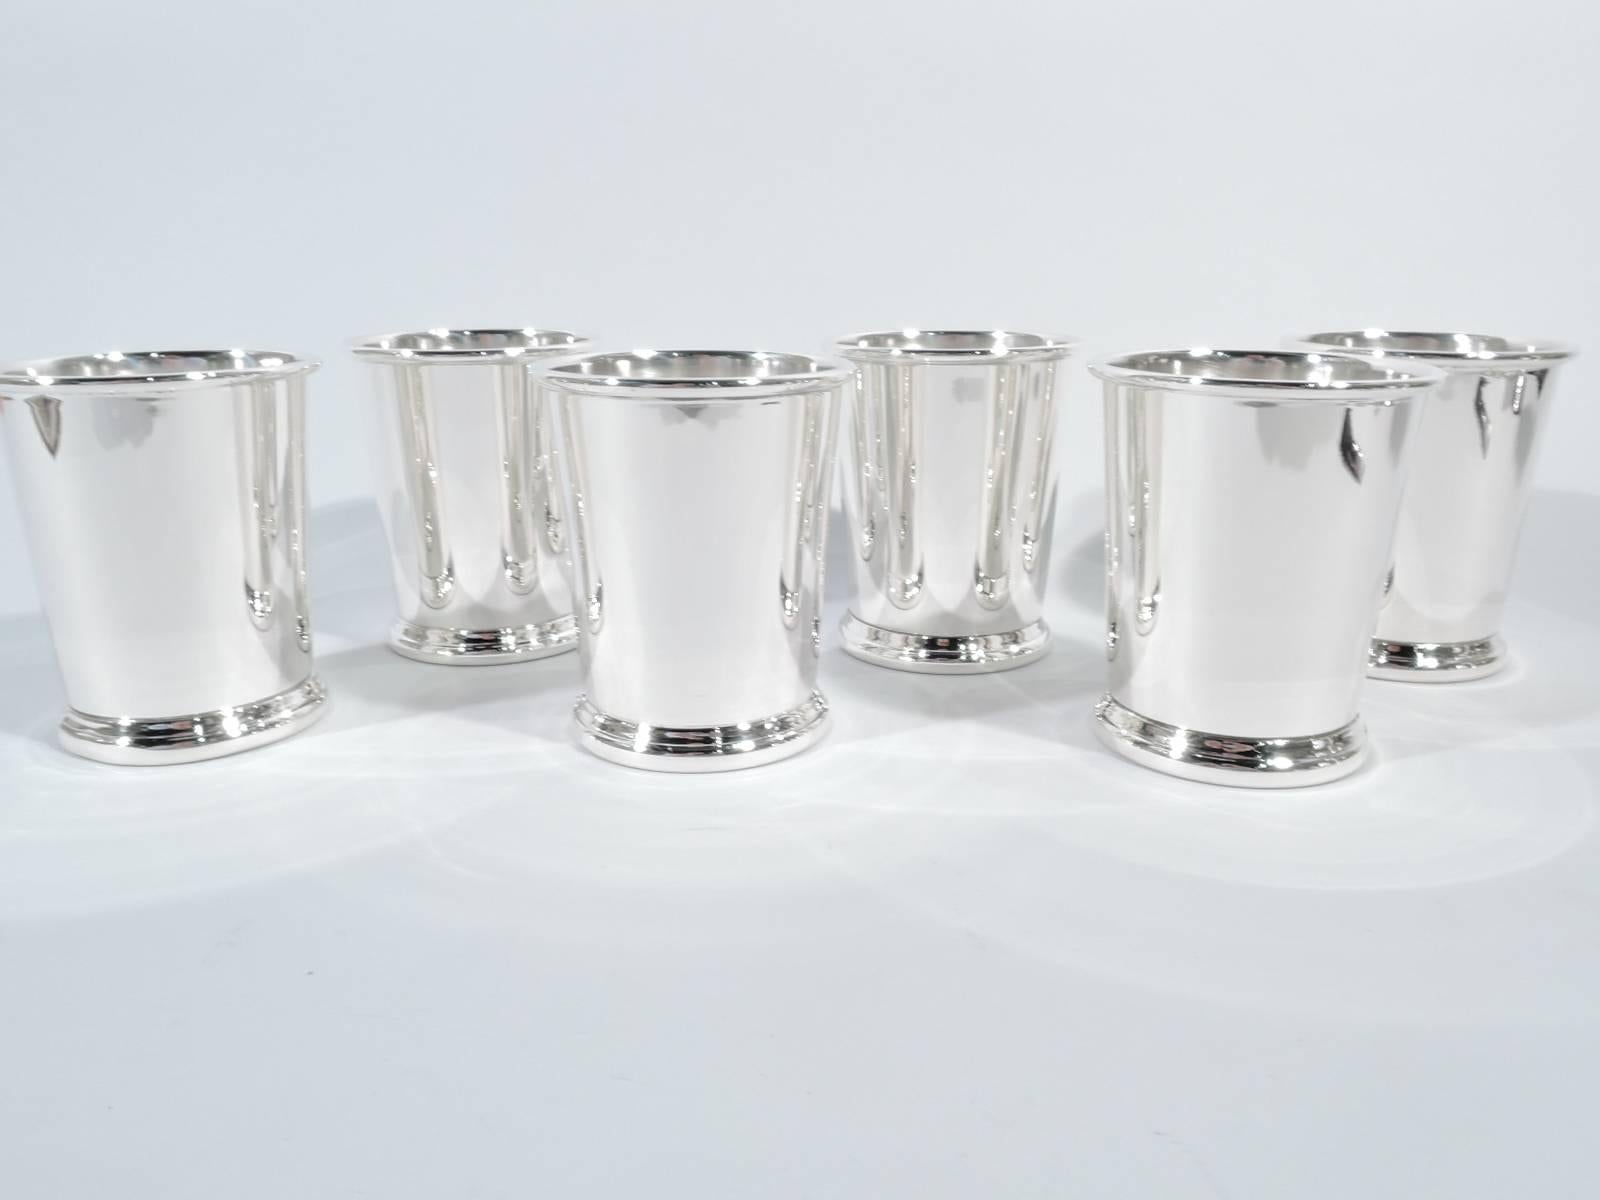 Set of six sterling silver mint julep cups. Made by Preisner in Wallingford, Conn. Each: Straight and tapering sides, molded rim, and skirted foot. Hallmark includes no. 140. Total weight: 28 troy ounces.